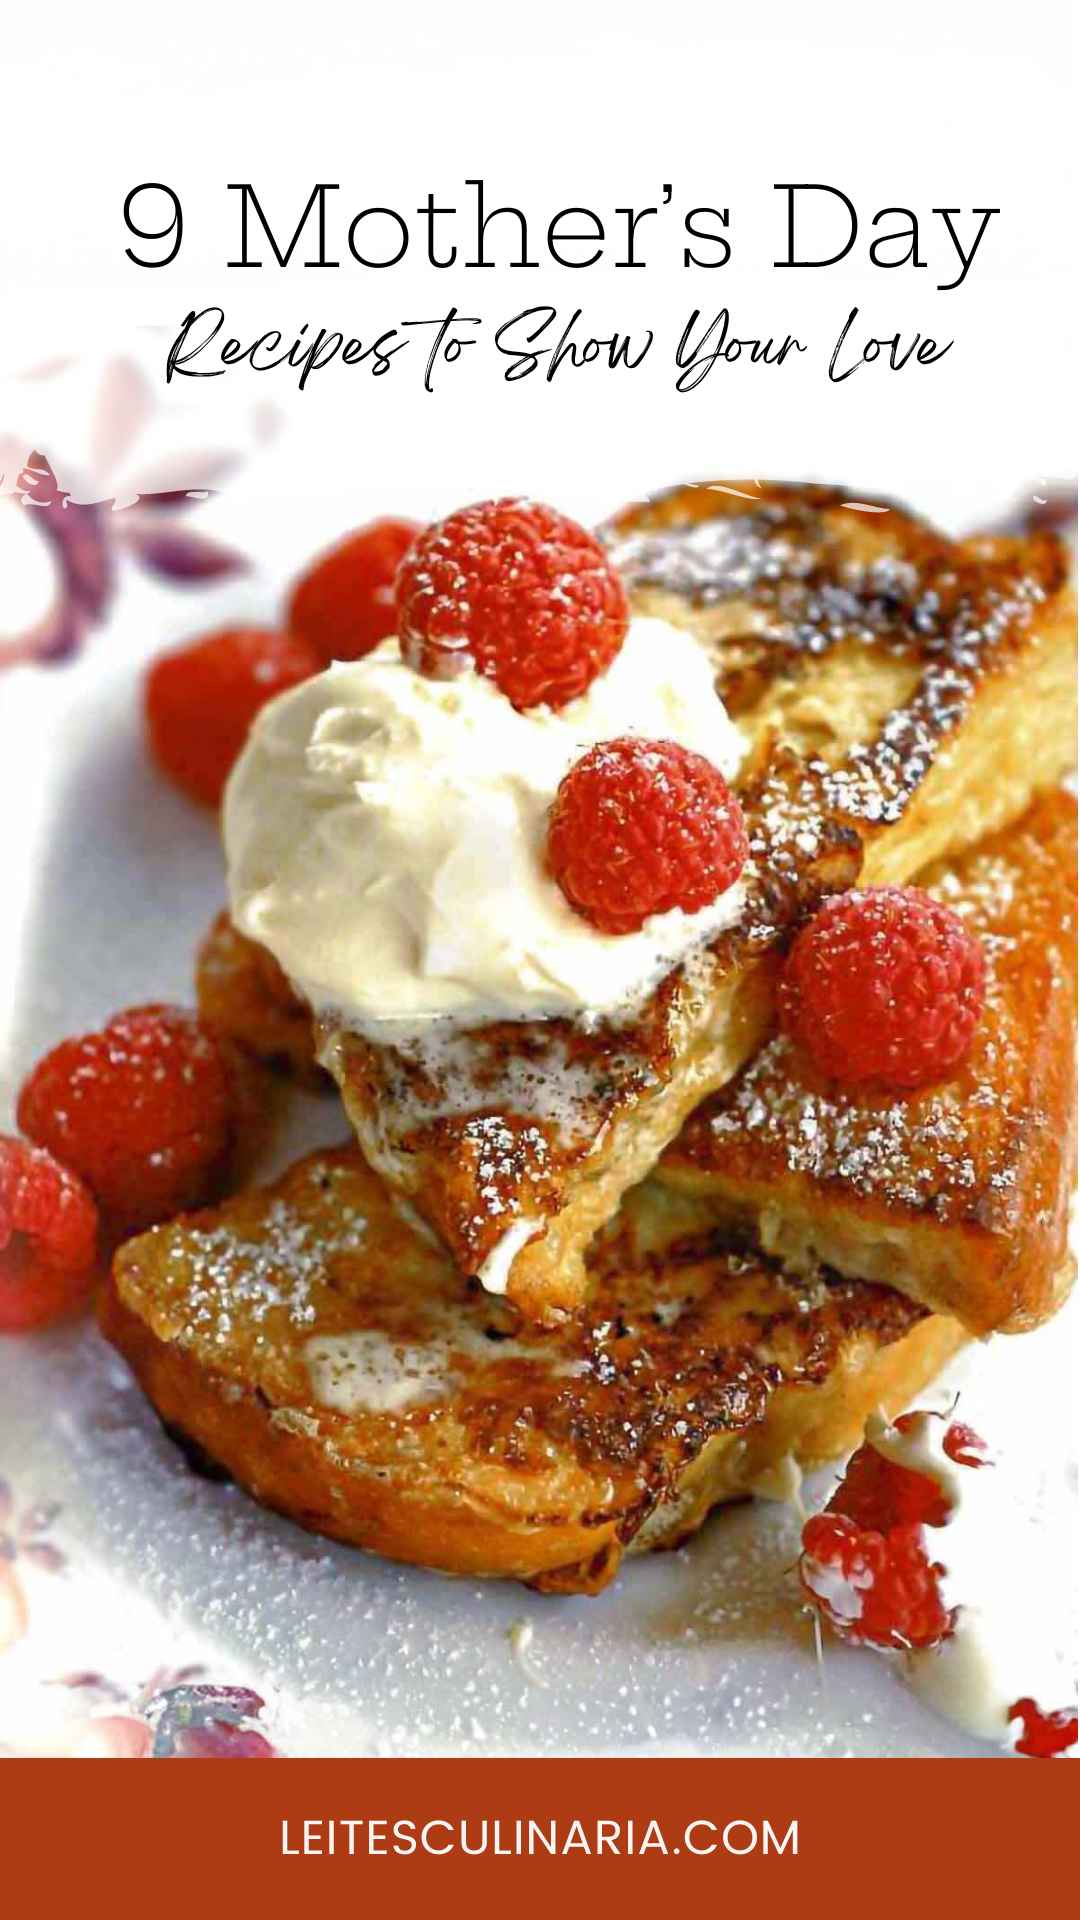 Pieces of French toast stacked on a plate, topped with whipped cream and raspberries.